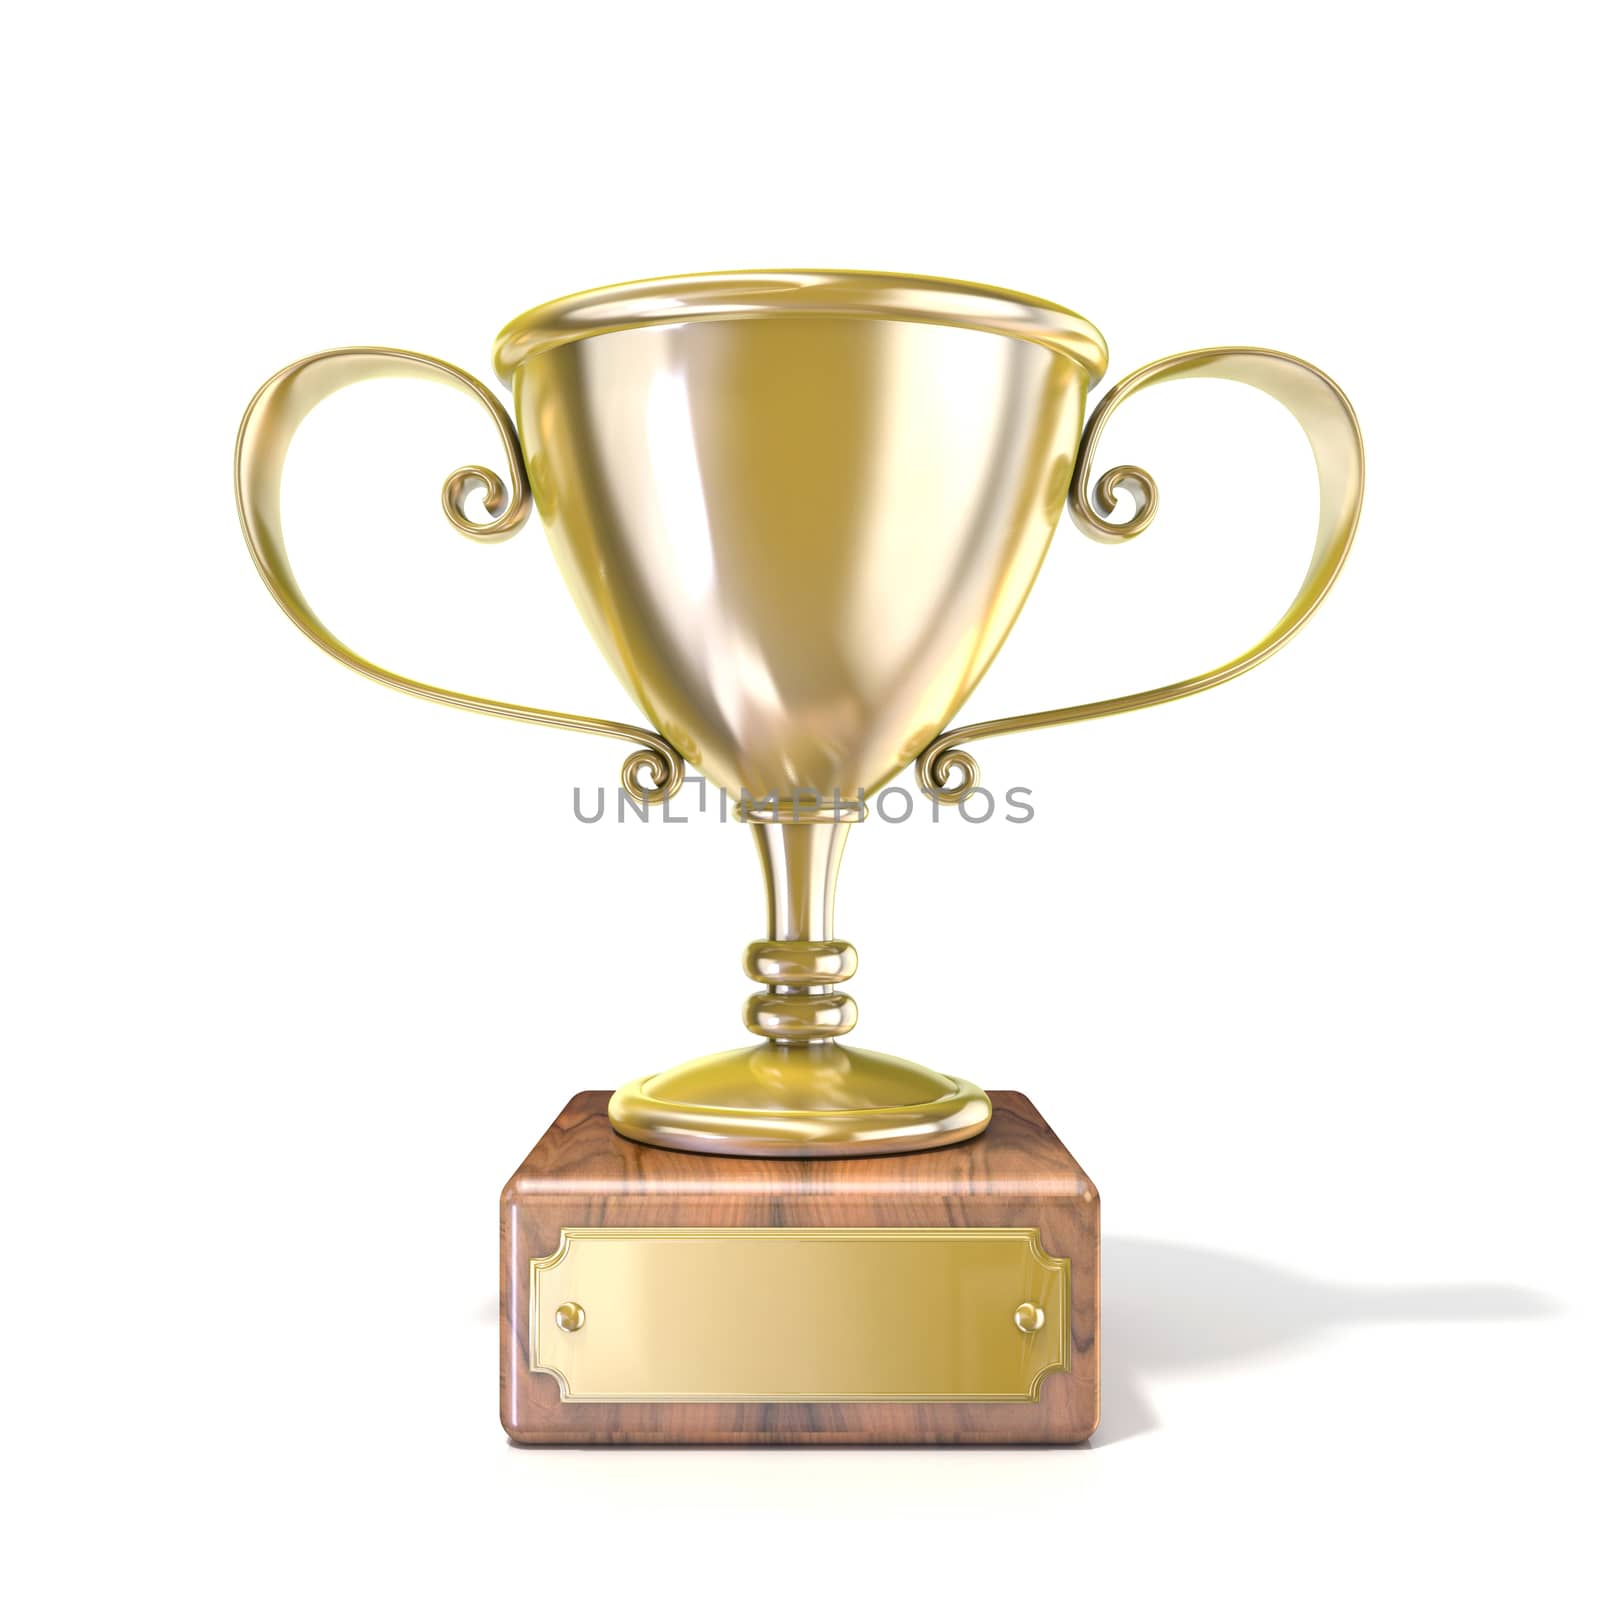 Golden trophy cup. 3D render illustration isolated on white background